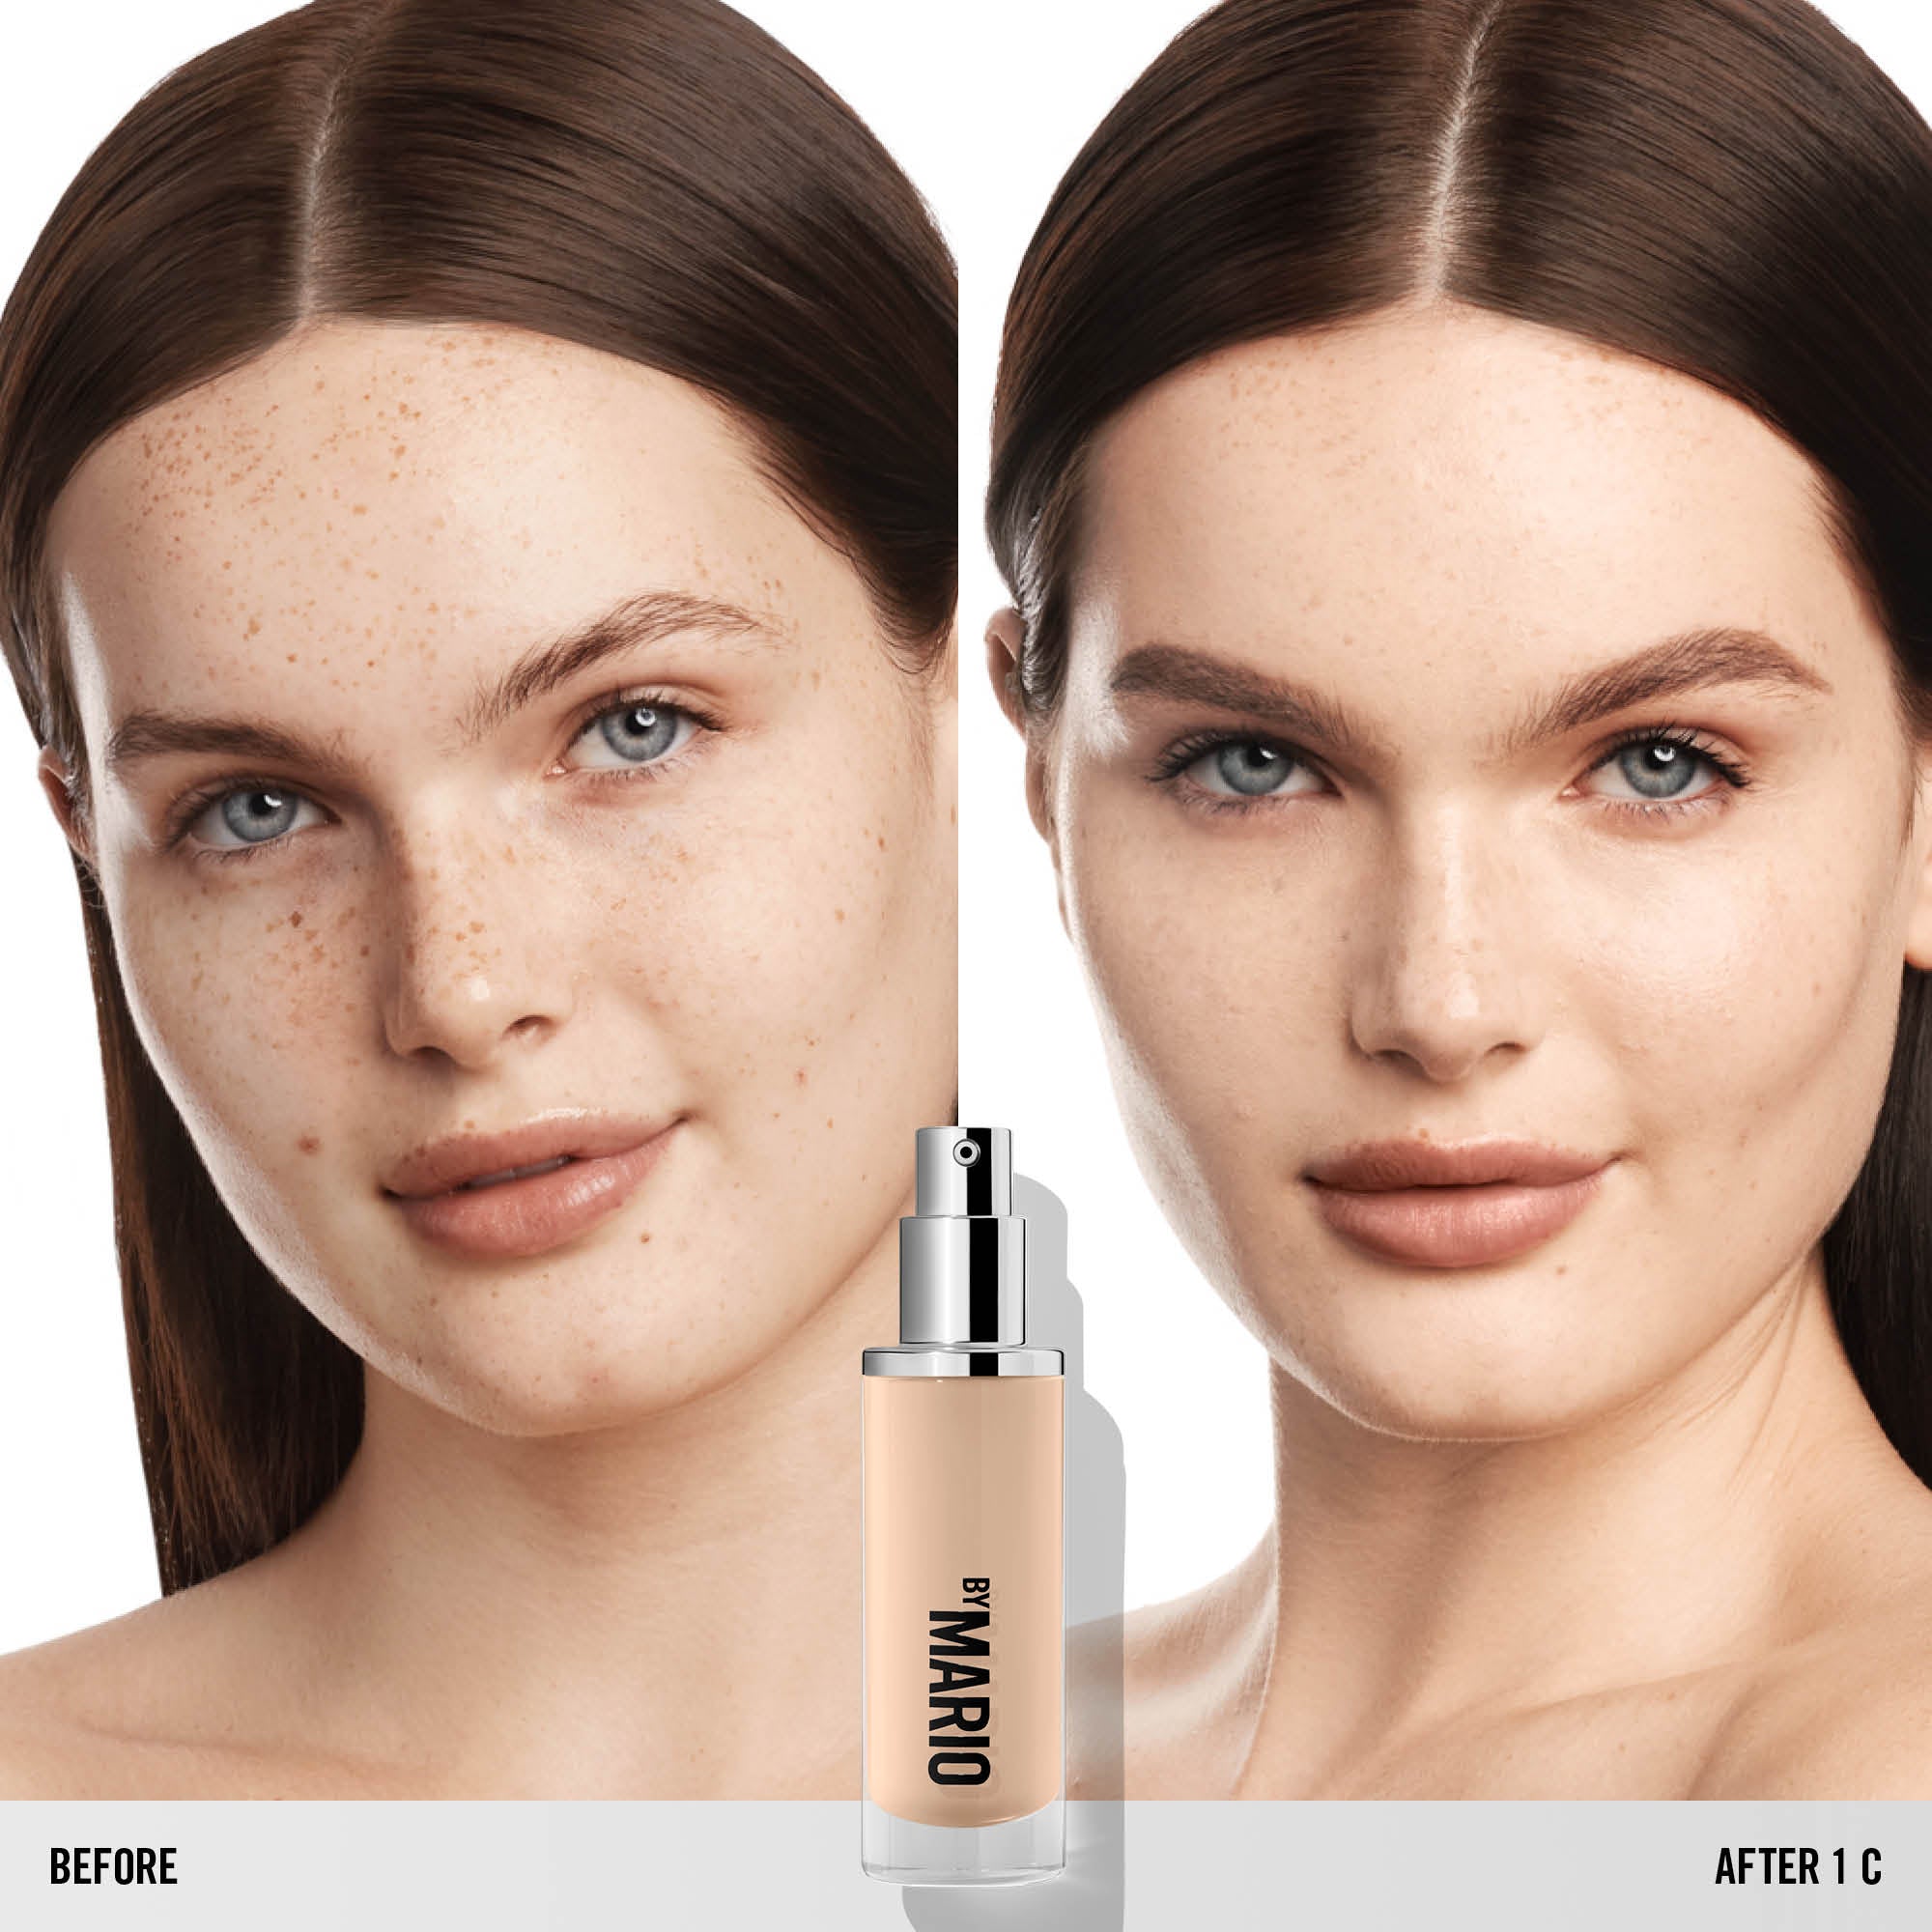 How to Match Your Foundation: 8 Tips & Tricks